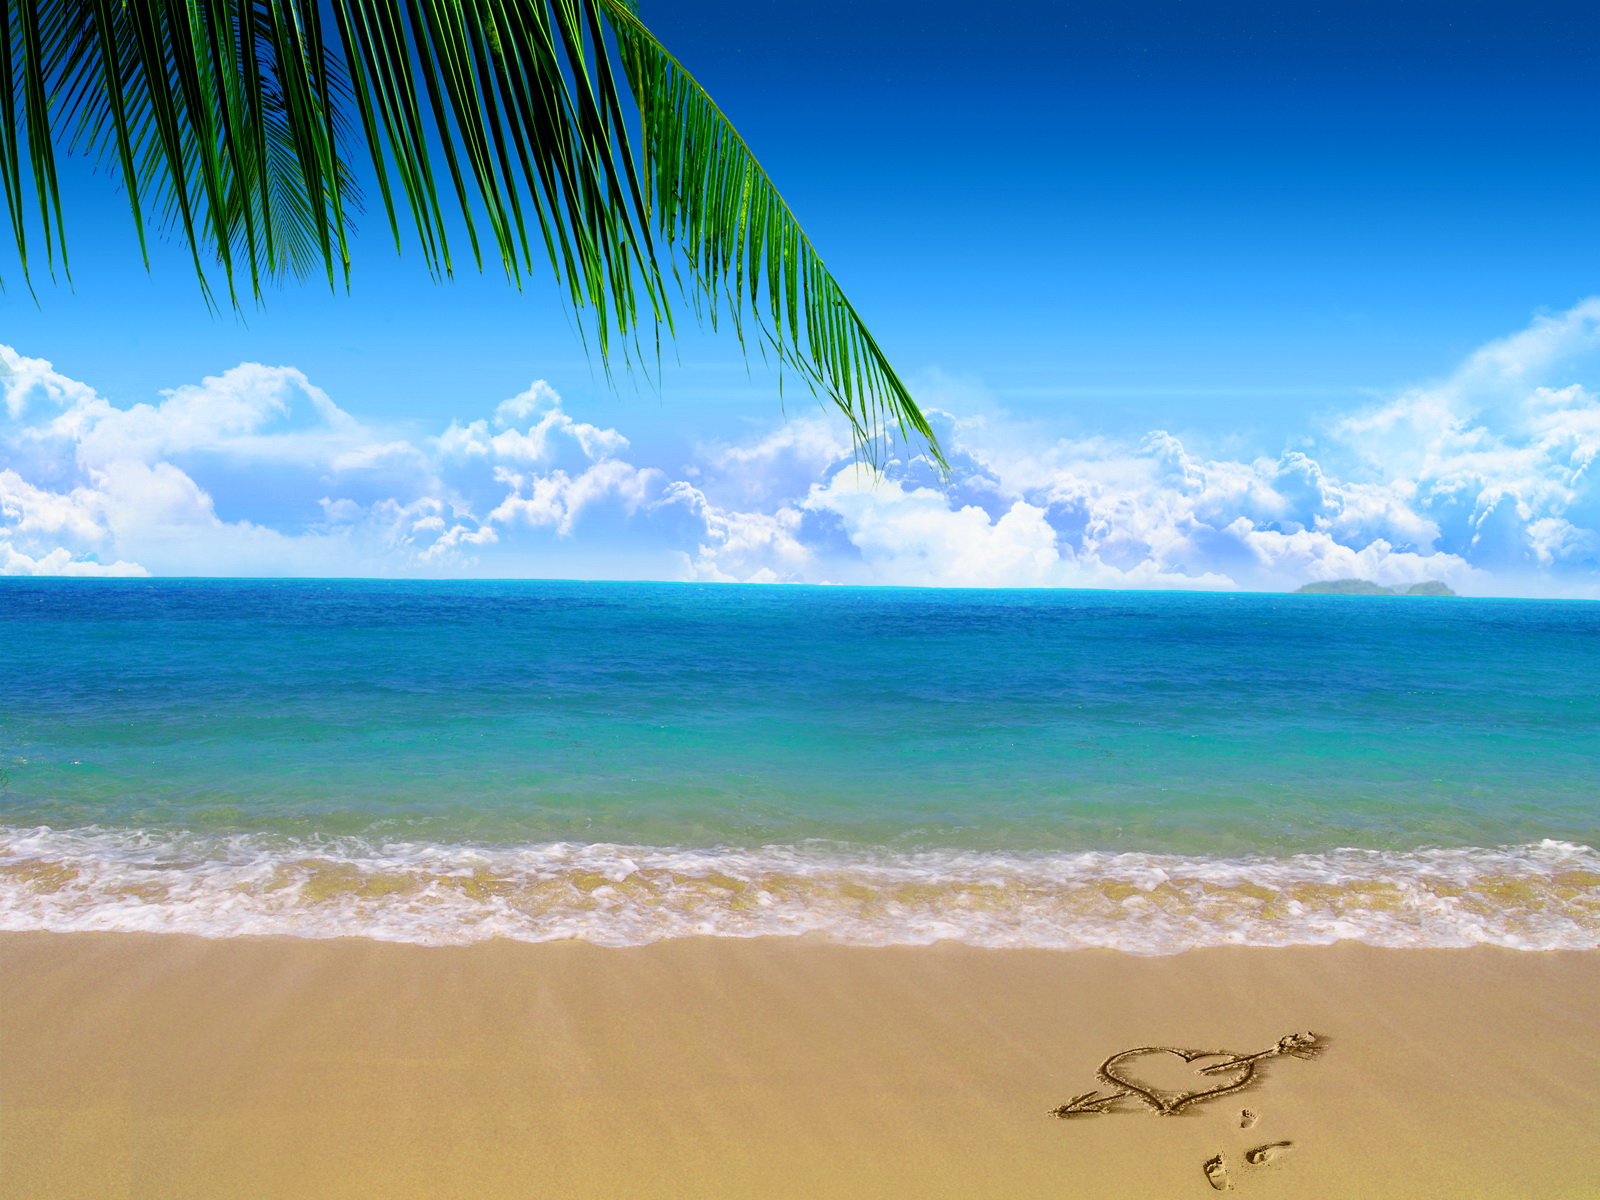 Desktop Wallpaper Oceanside Palm And Heart Drawn In The